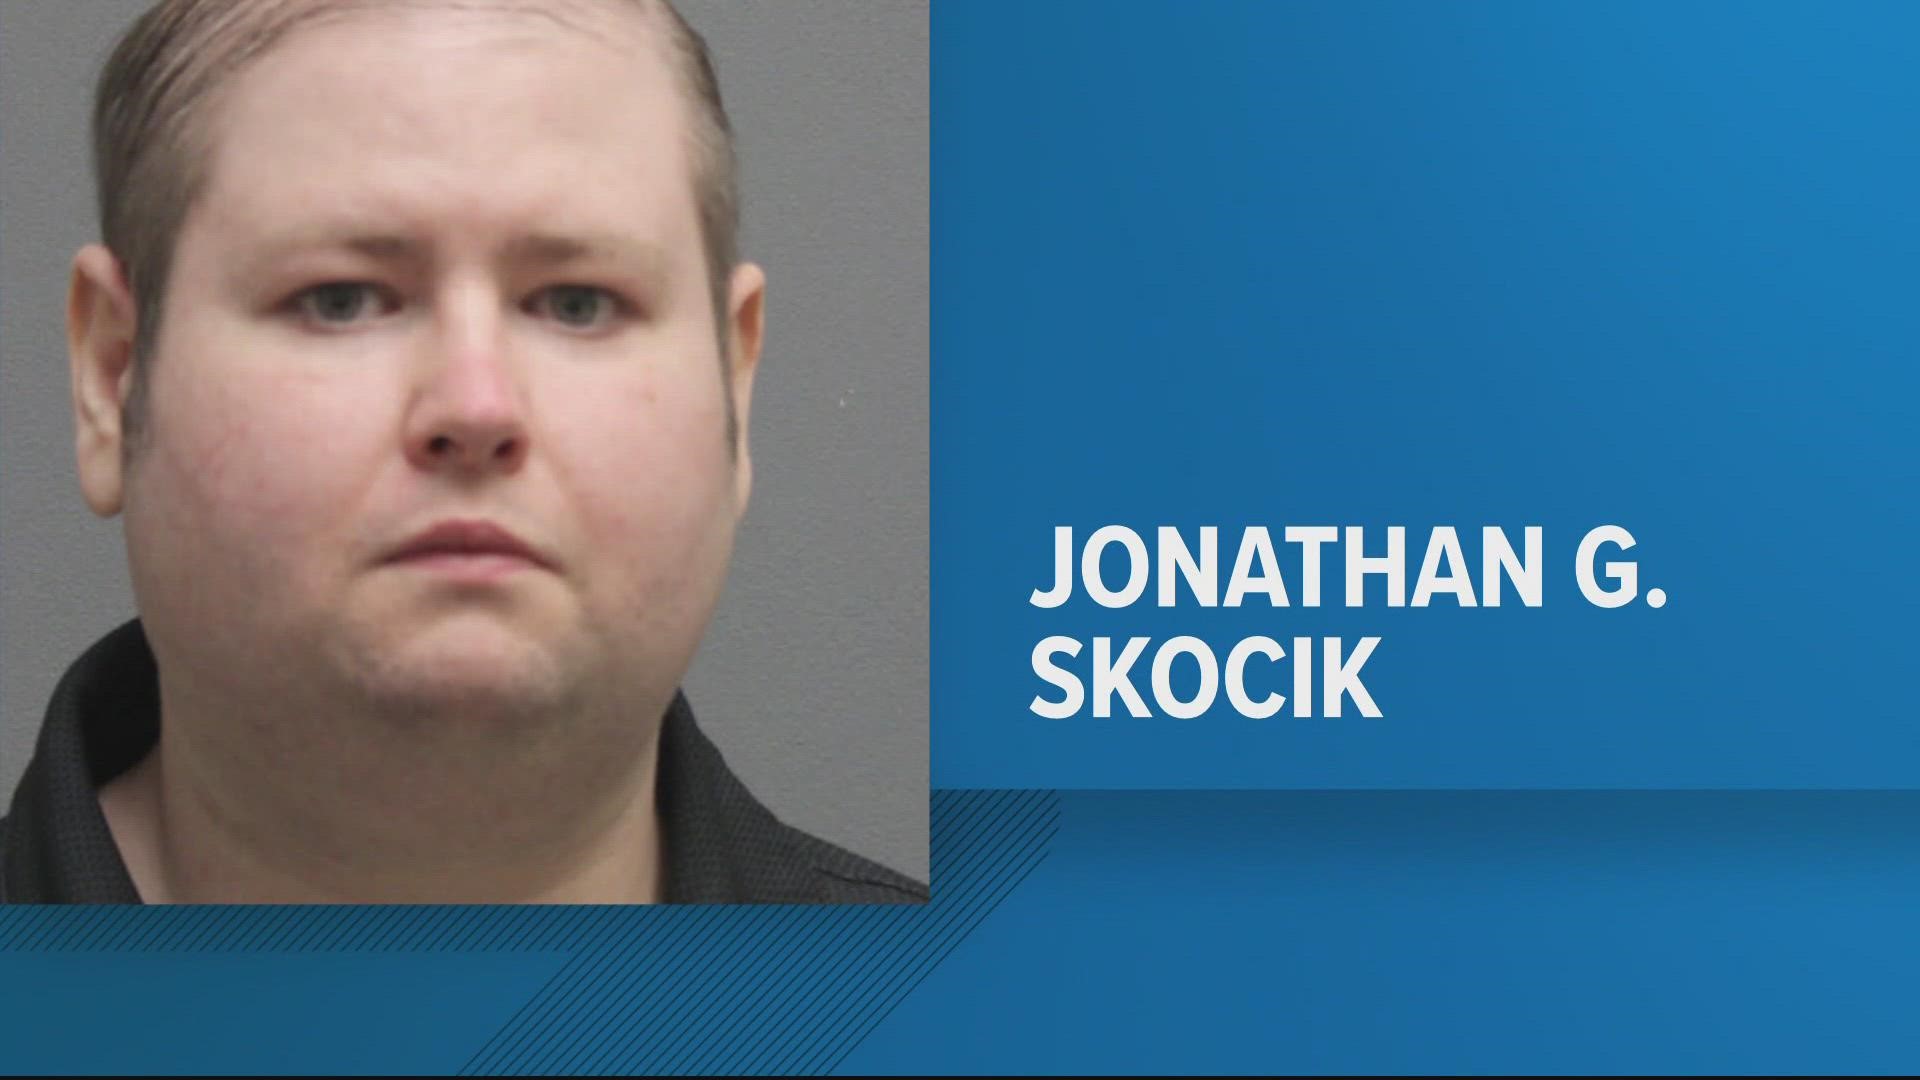 An IT specialist at Jenkins Elementary School in Woodbridge is accused of sexually assaulting four 8-year-olds in his office, Prince William County police say.